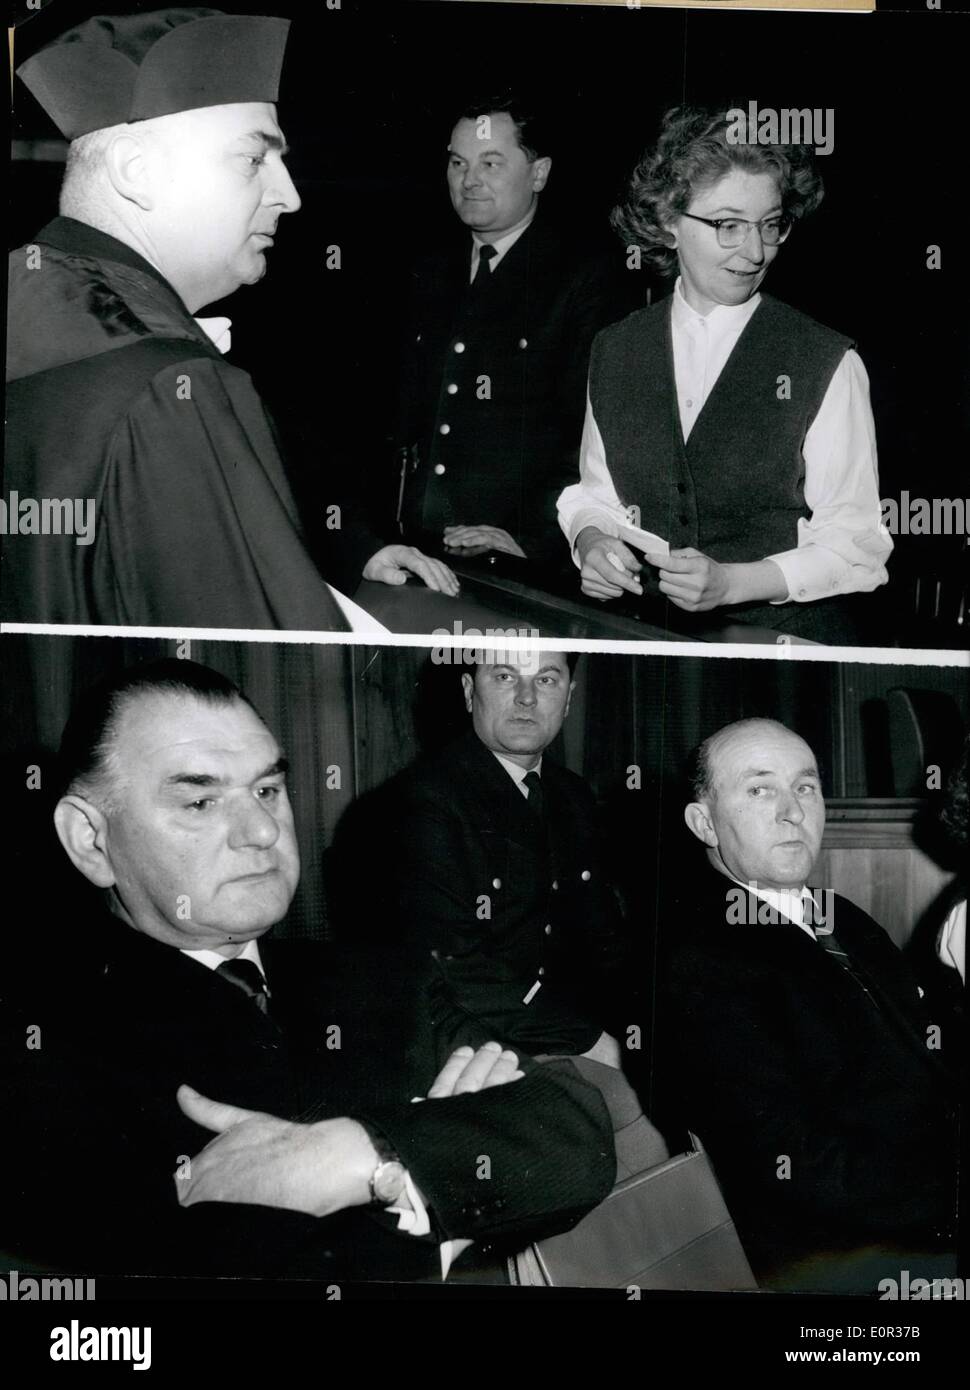 Nov. 11, 1957 - Fraeulein Sonntag in Munich's jury trial; On November 27, 1957 at 8:30 hours started in Munich the jury trial against the 36 years old denounce Ursula Sonntag, who is being accused to have denounced her former boss, the bank-direction Miethe to the Gestapo, because he had made prejudicial remarks. Miethe had been arrested and sentenced to death. Co-defendandts are the former block-leader Oswald Micheal and the former district leader George Joschke of Hindenburg/upper Silesia Stock Photo